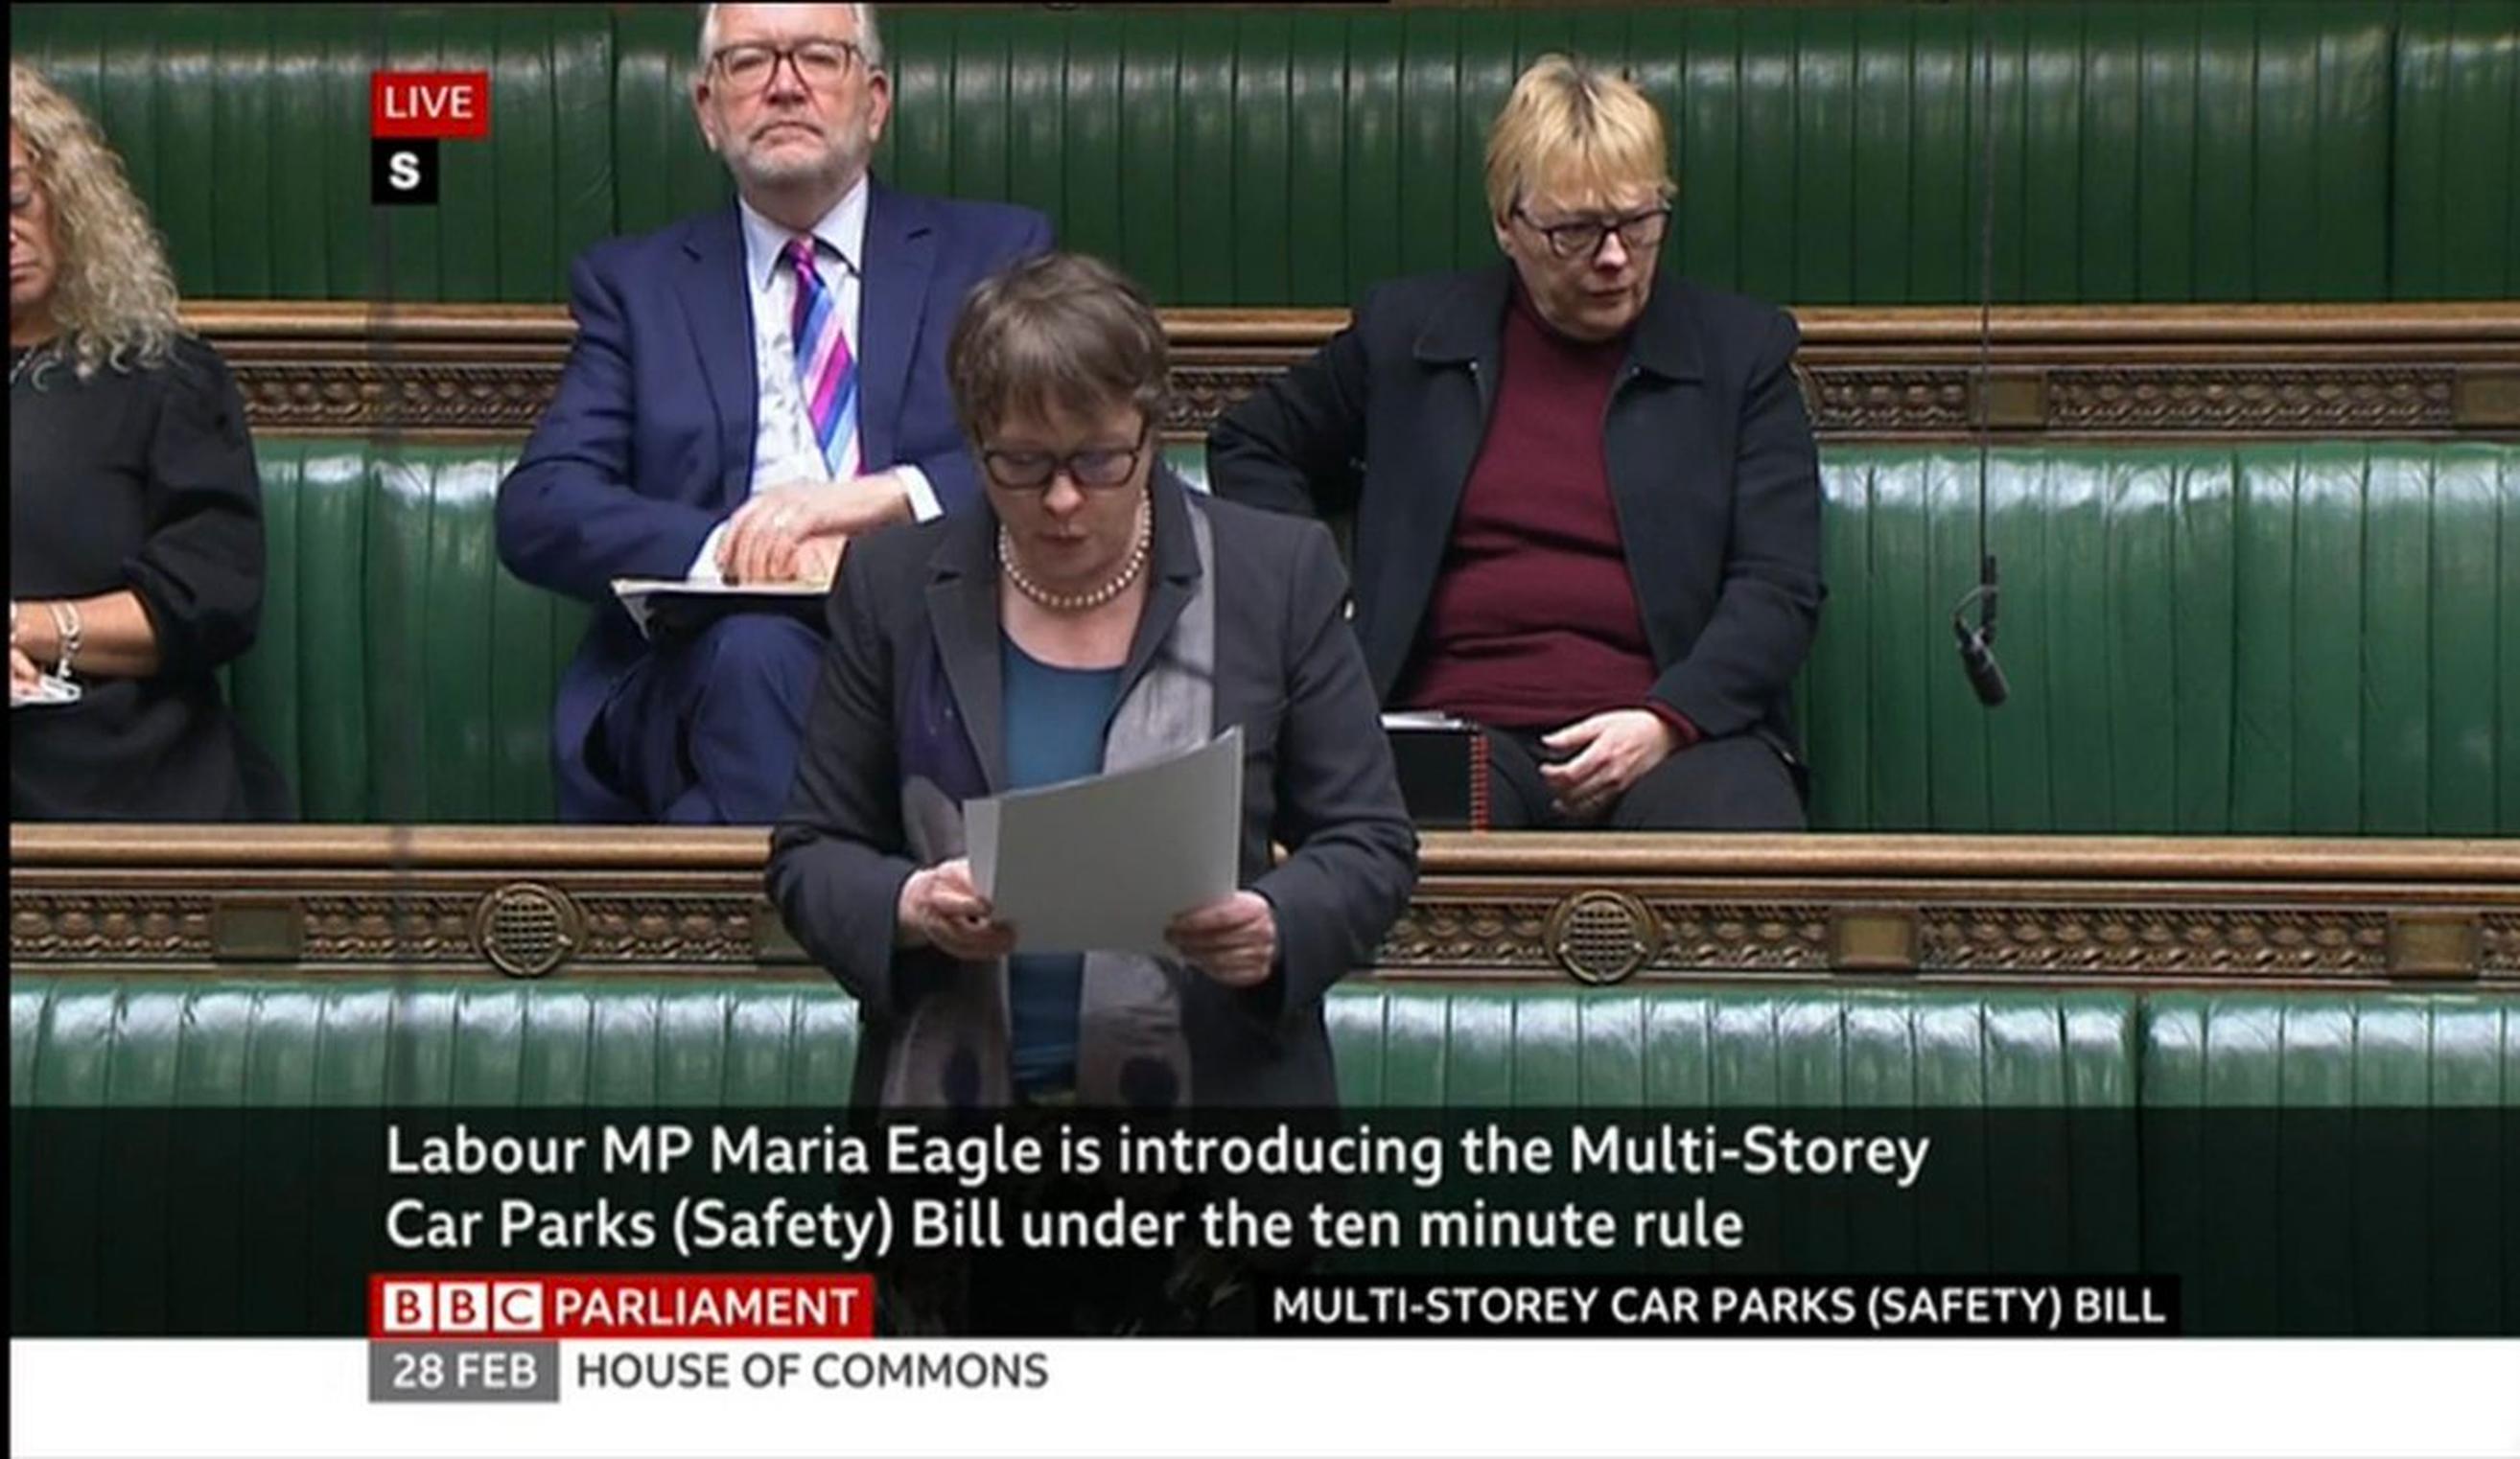 Maria Eagle MP introduces her Bill at Parliament